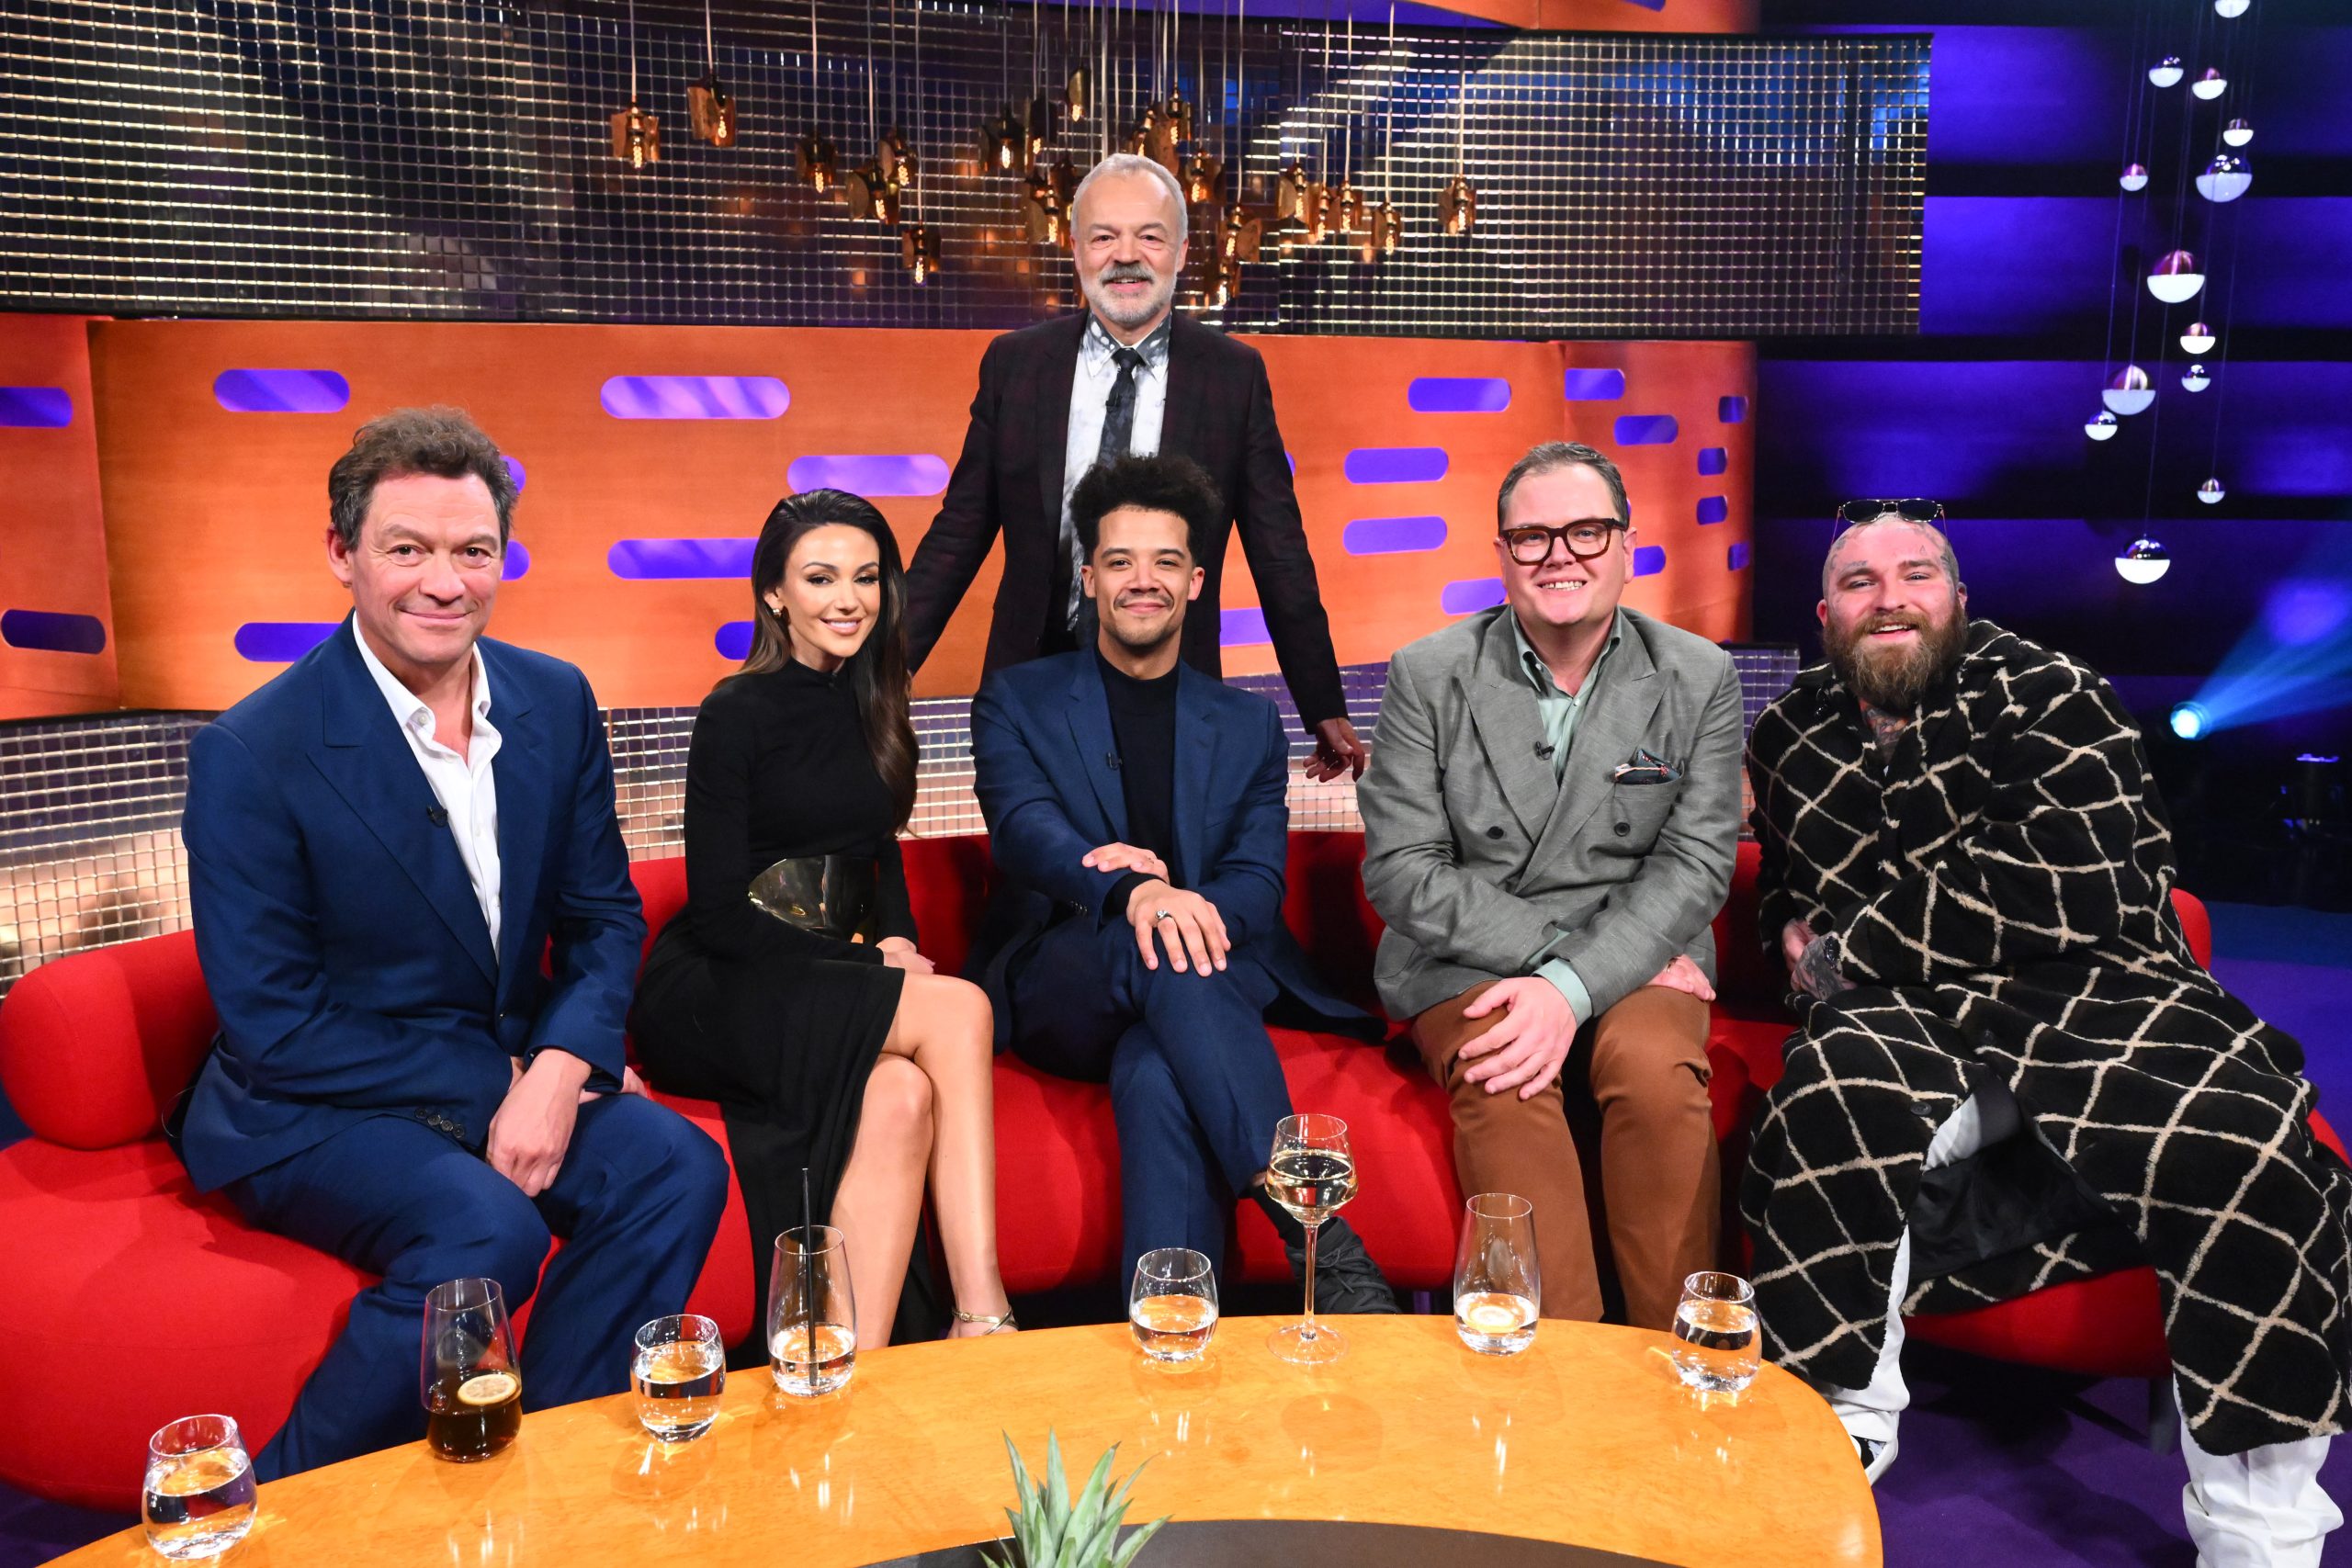 Graham Norton meets Dominic West, Michelle Keegan, Jacob Anderson, Alan Carr and Teddy Swims